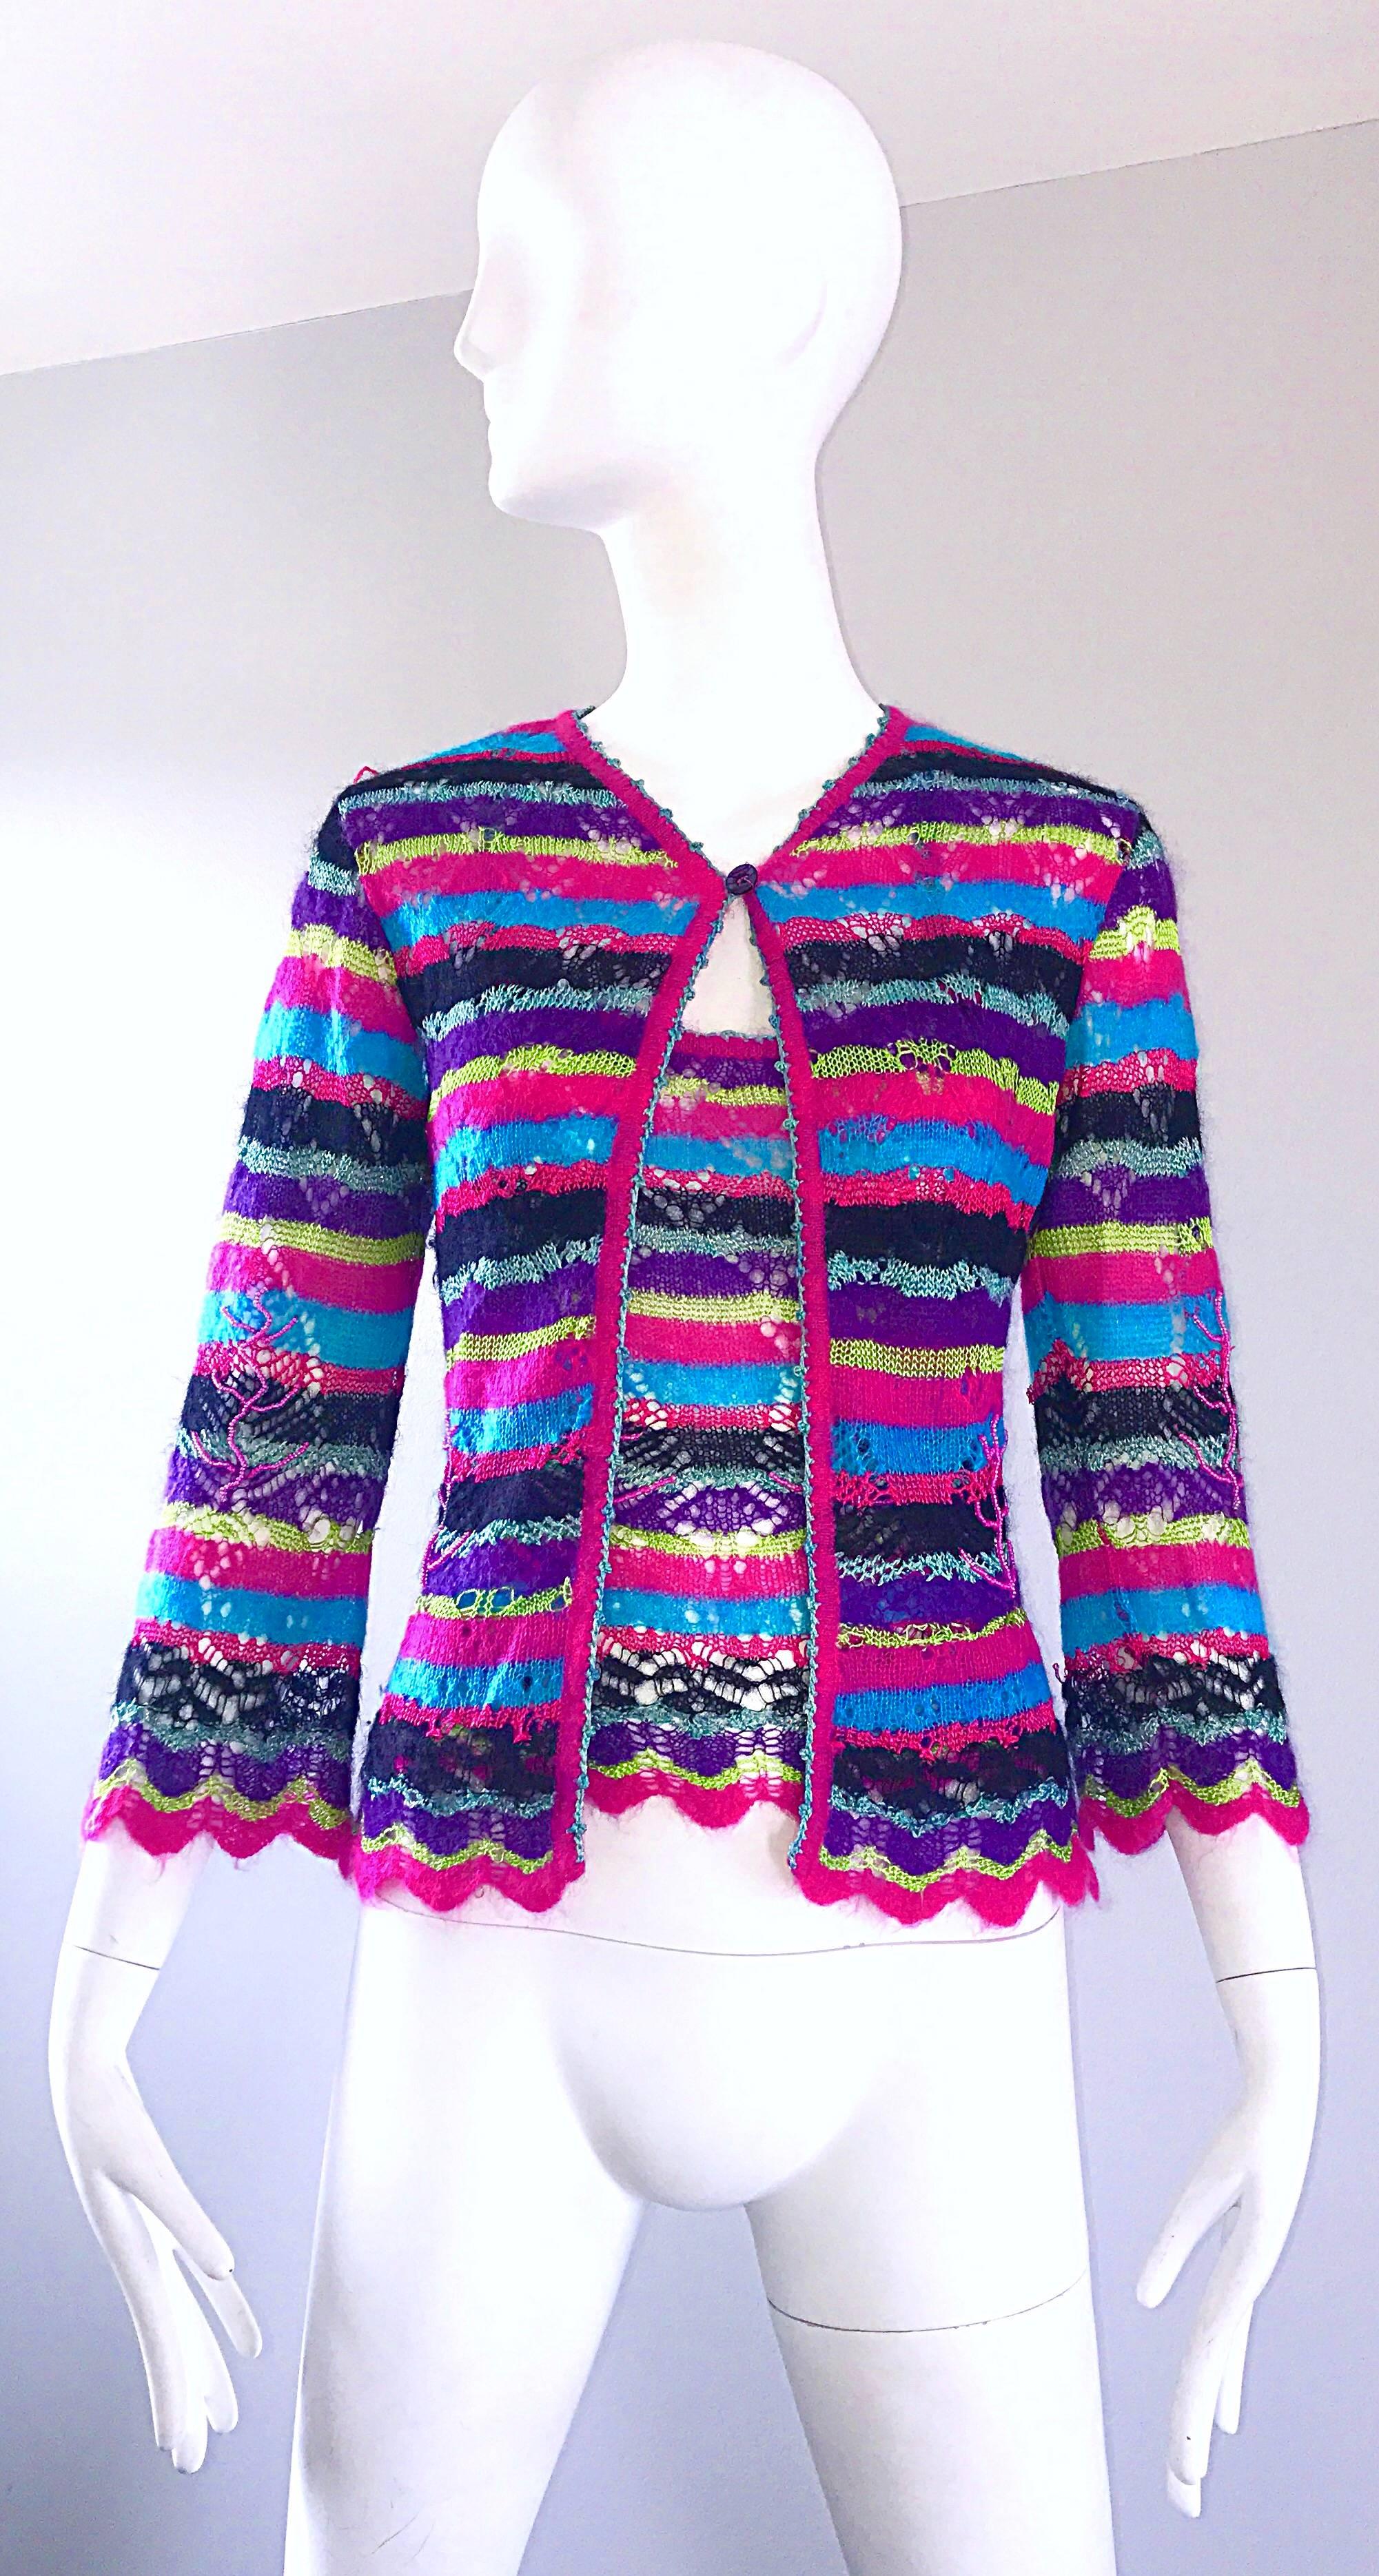 Unbelievable vintage CHRISTIAN LACROIX early 90s beaded crochet sweater twin set! Features allover stripes in vibrant hues of pink, purple, chartreuse green, teal blue and black throughout. Crochet work throughout, with pink seed beads on both the